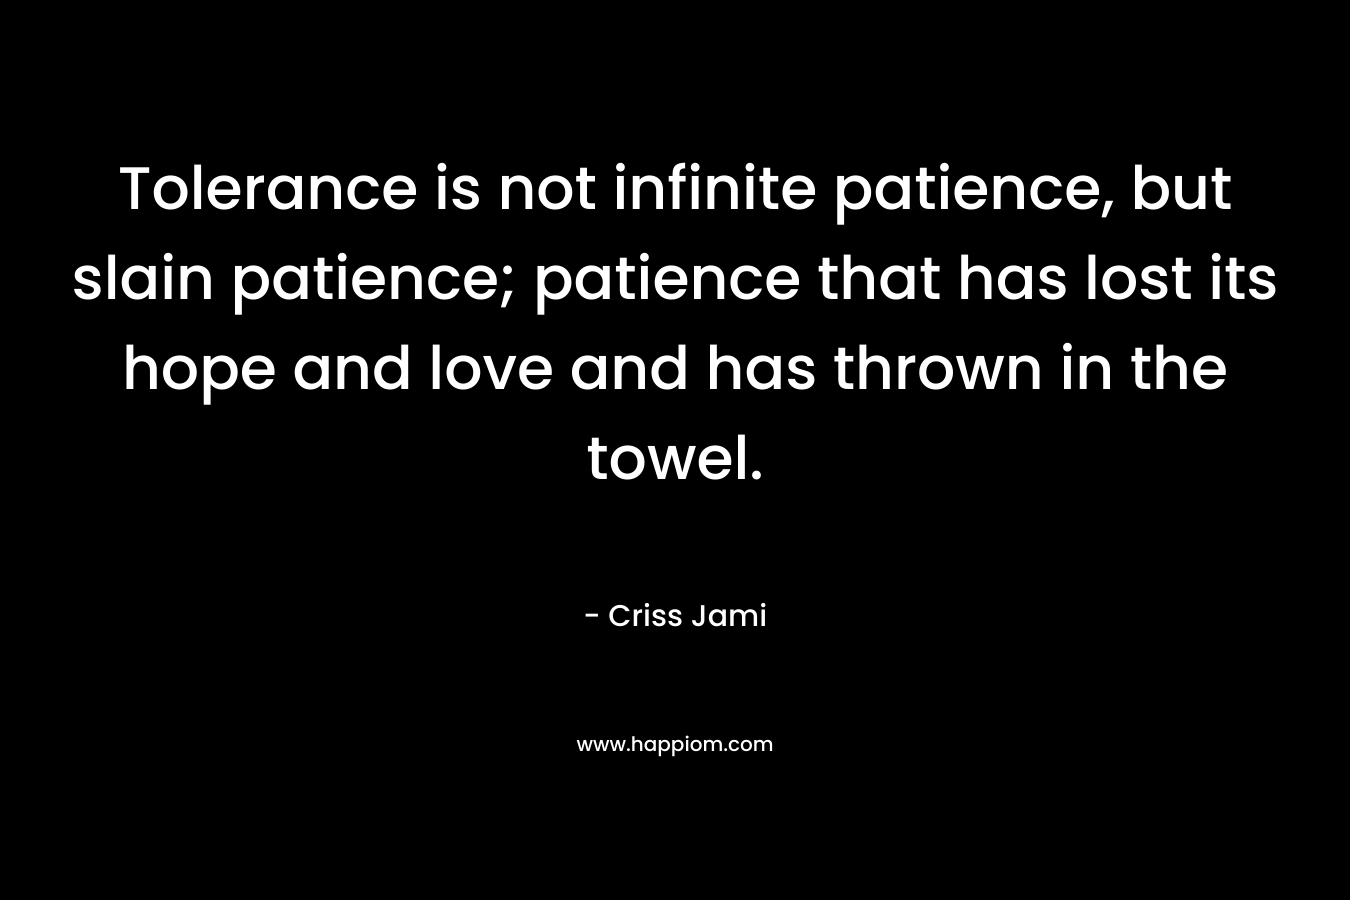 Tolerance is not infinite patience, but slain patience; patience that has lost its hope and love and has thrown in the towel.